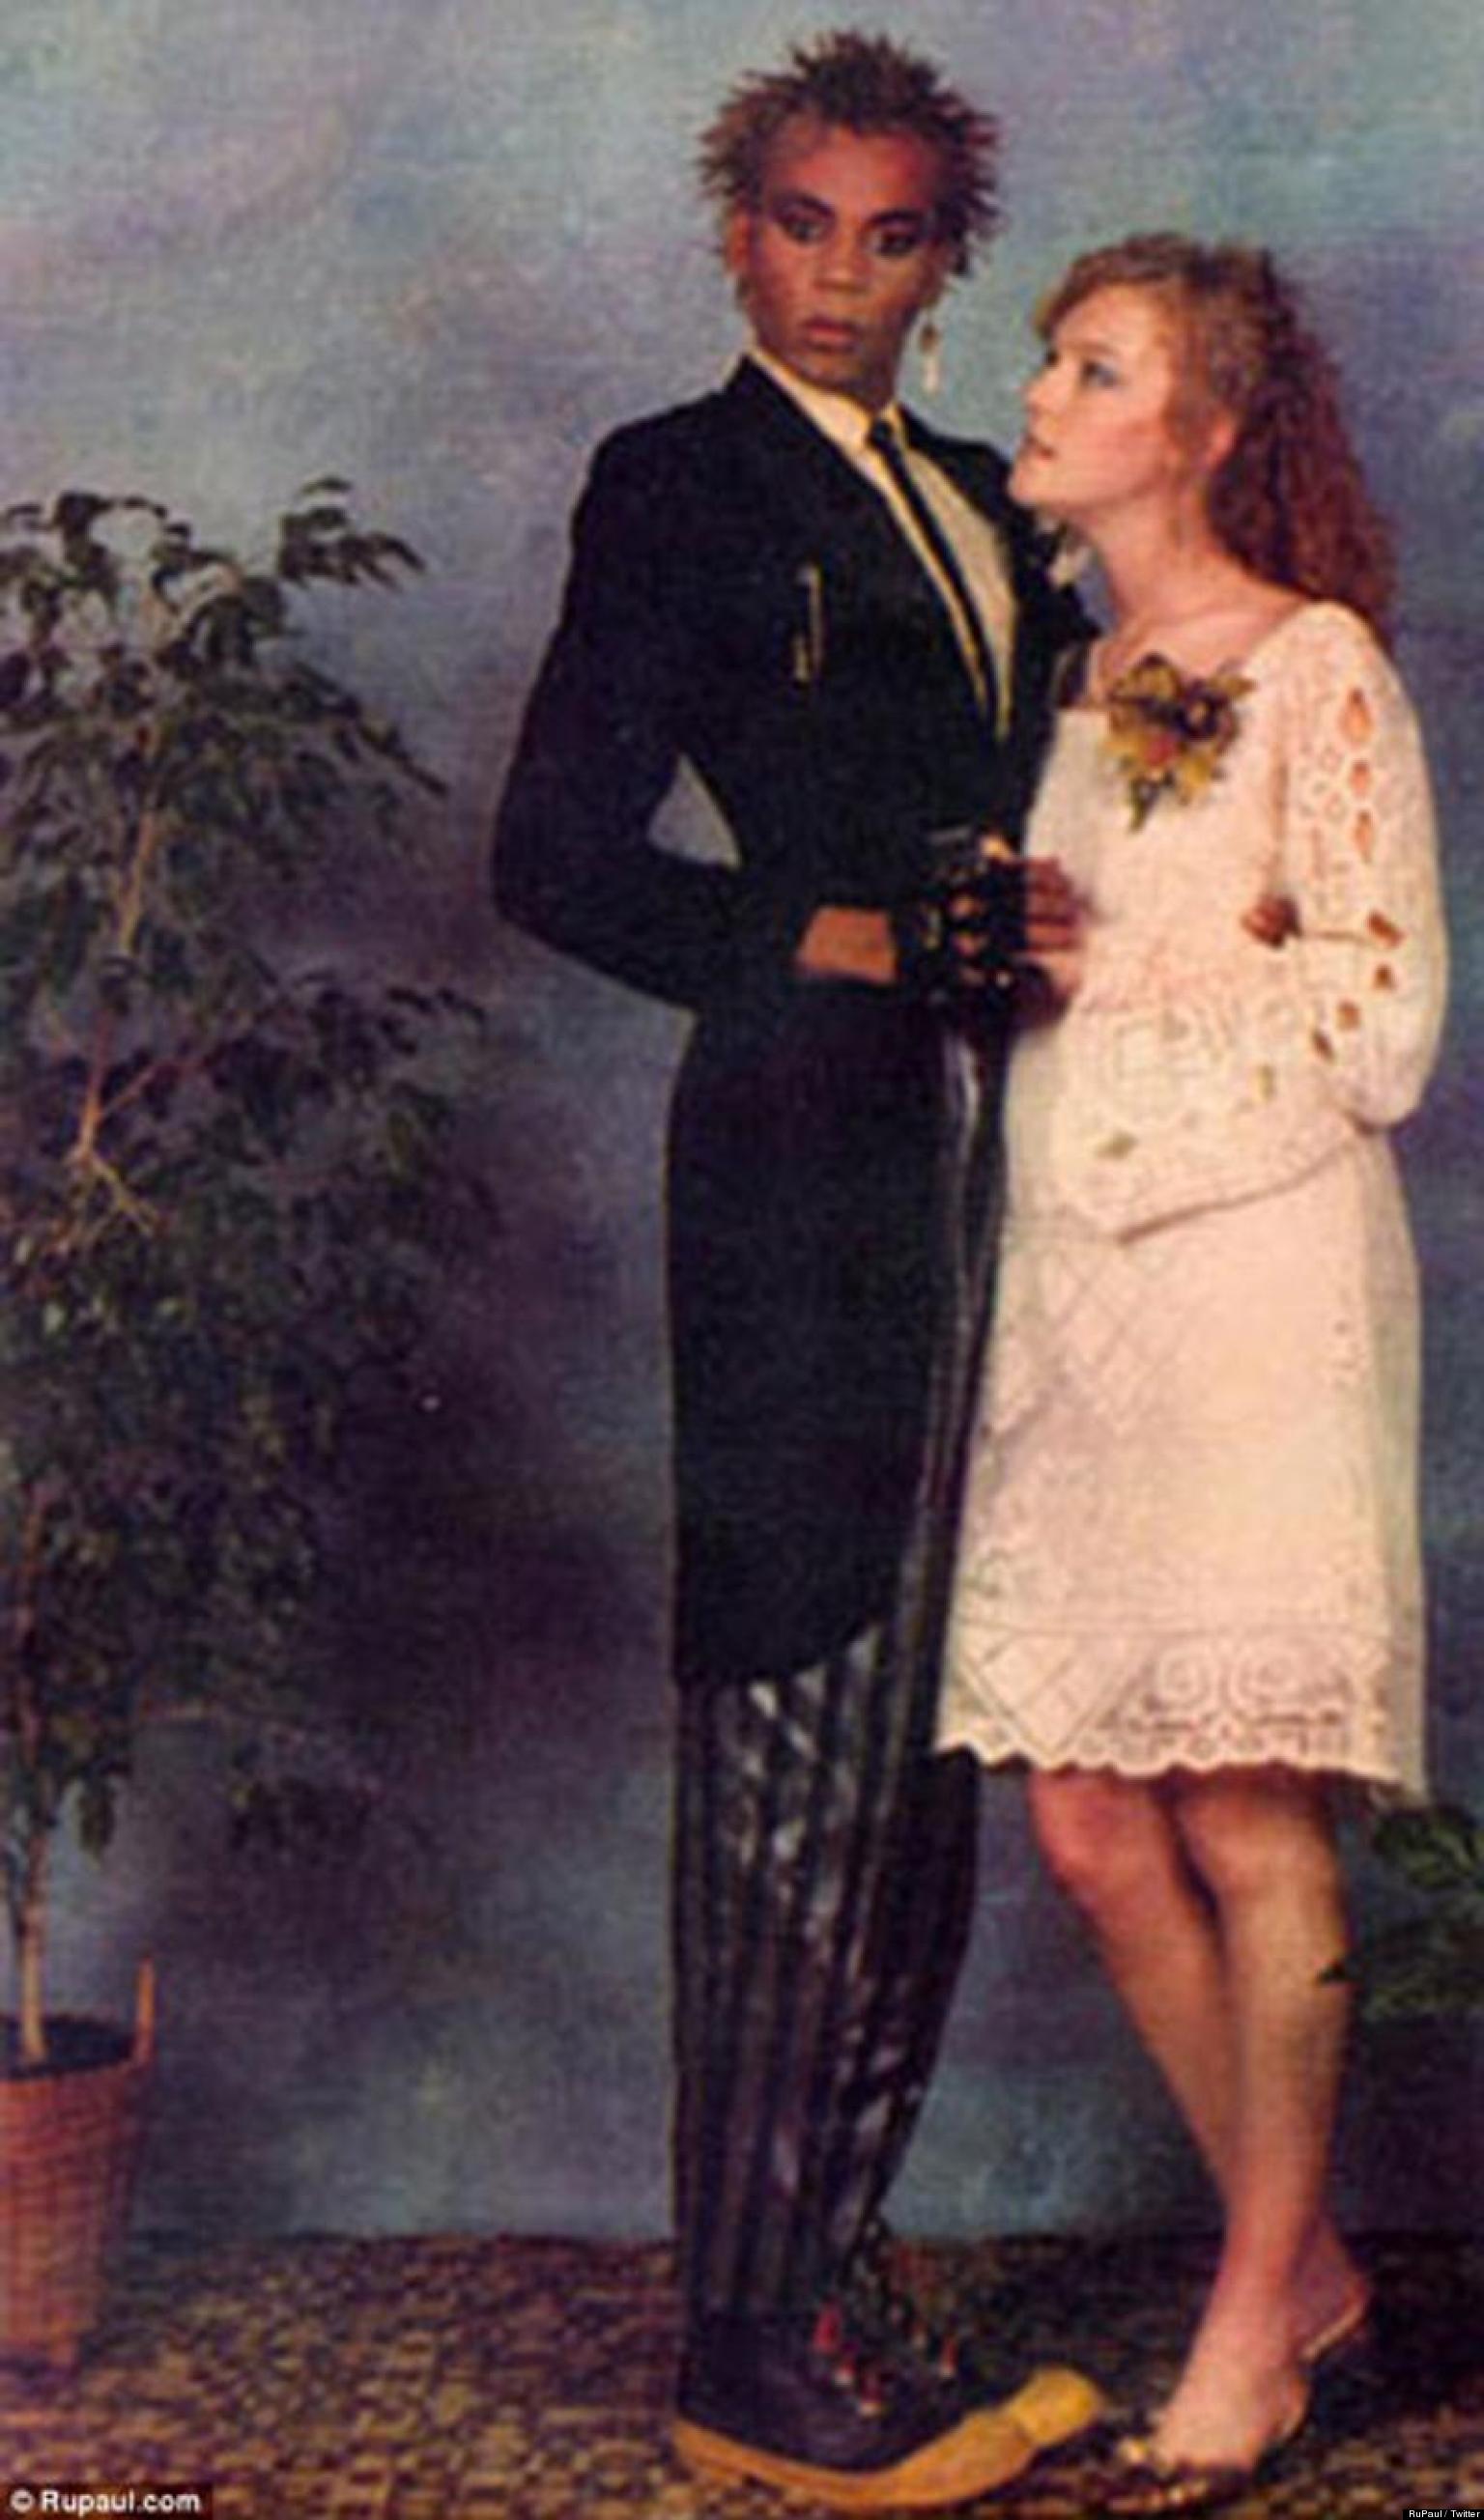 RuPaul's Prom Picture Shows Drag Queen Had It Going On Even In High School1536 x 2609